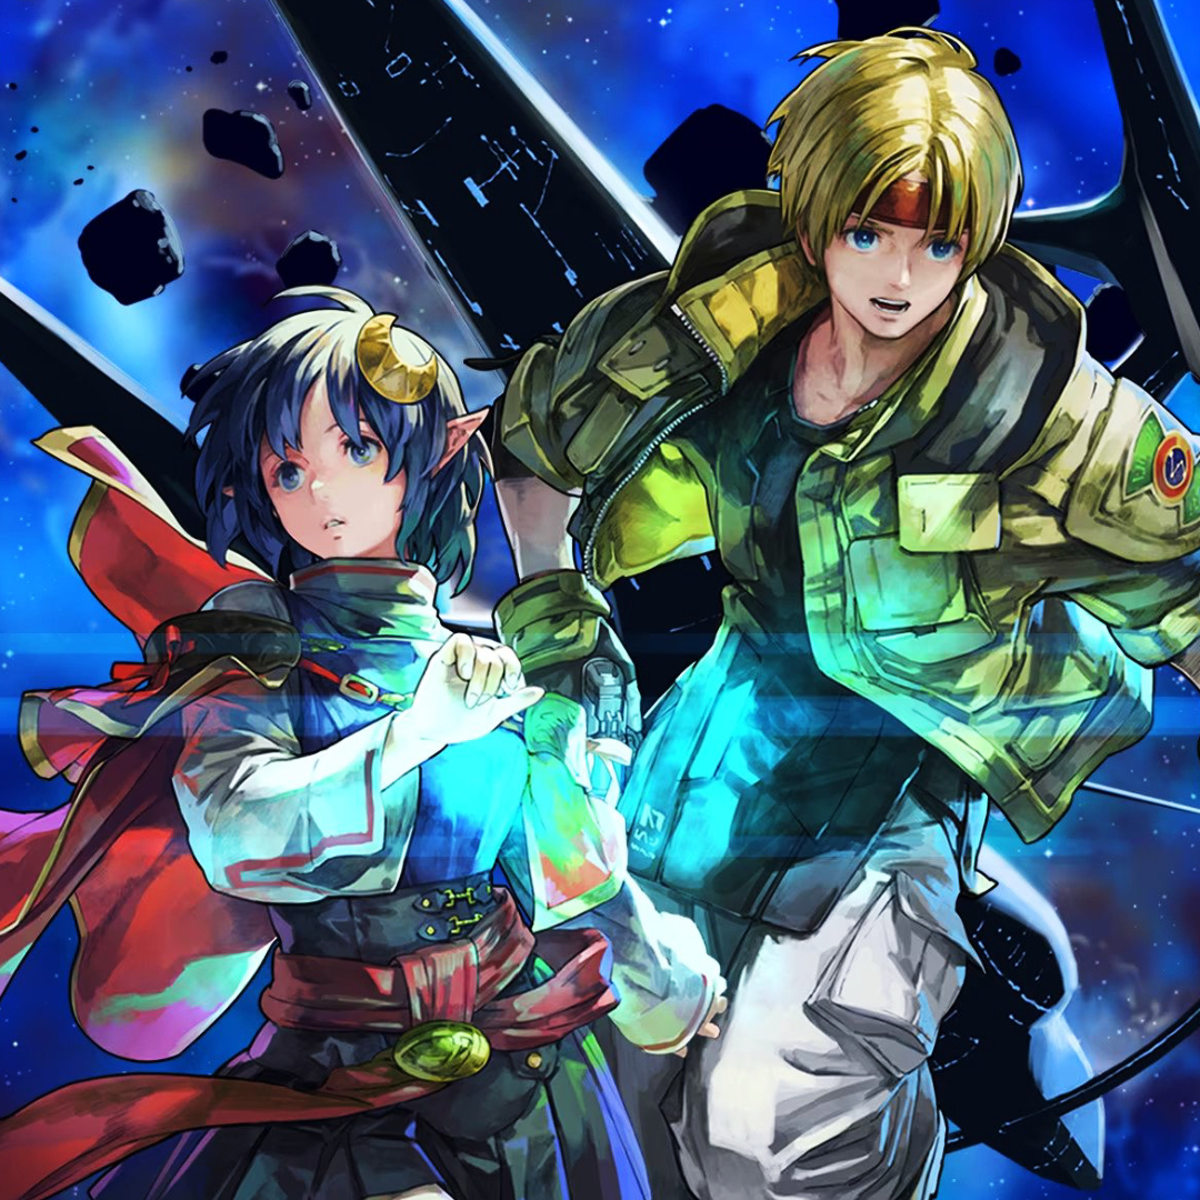 Star ocean the second